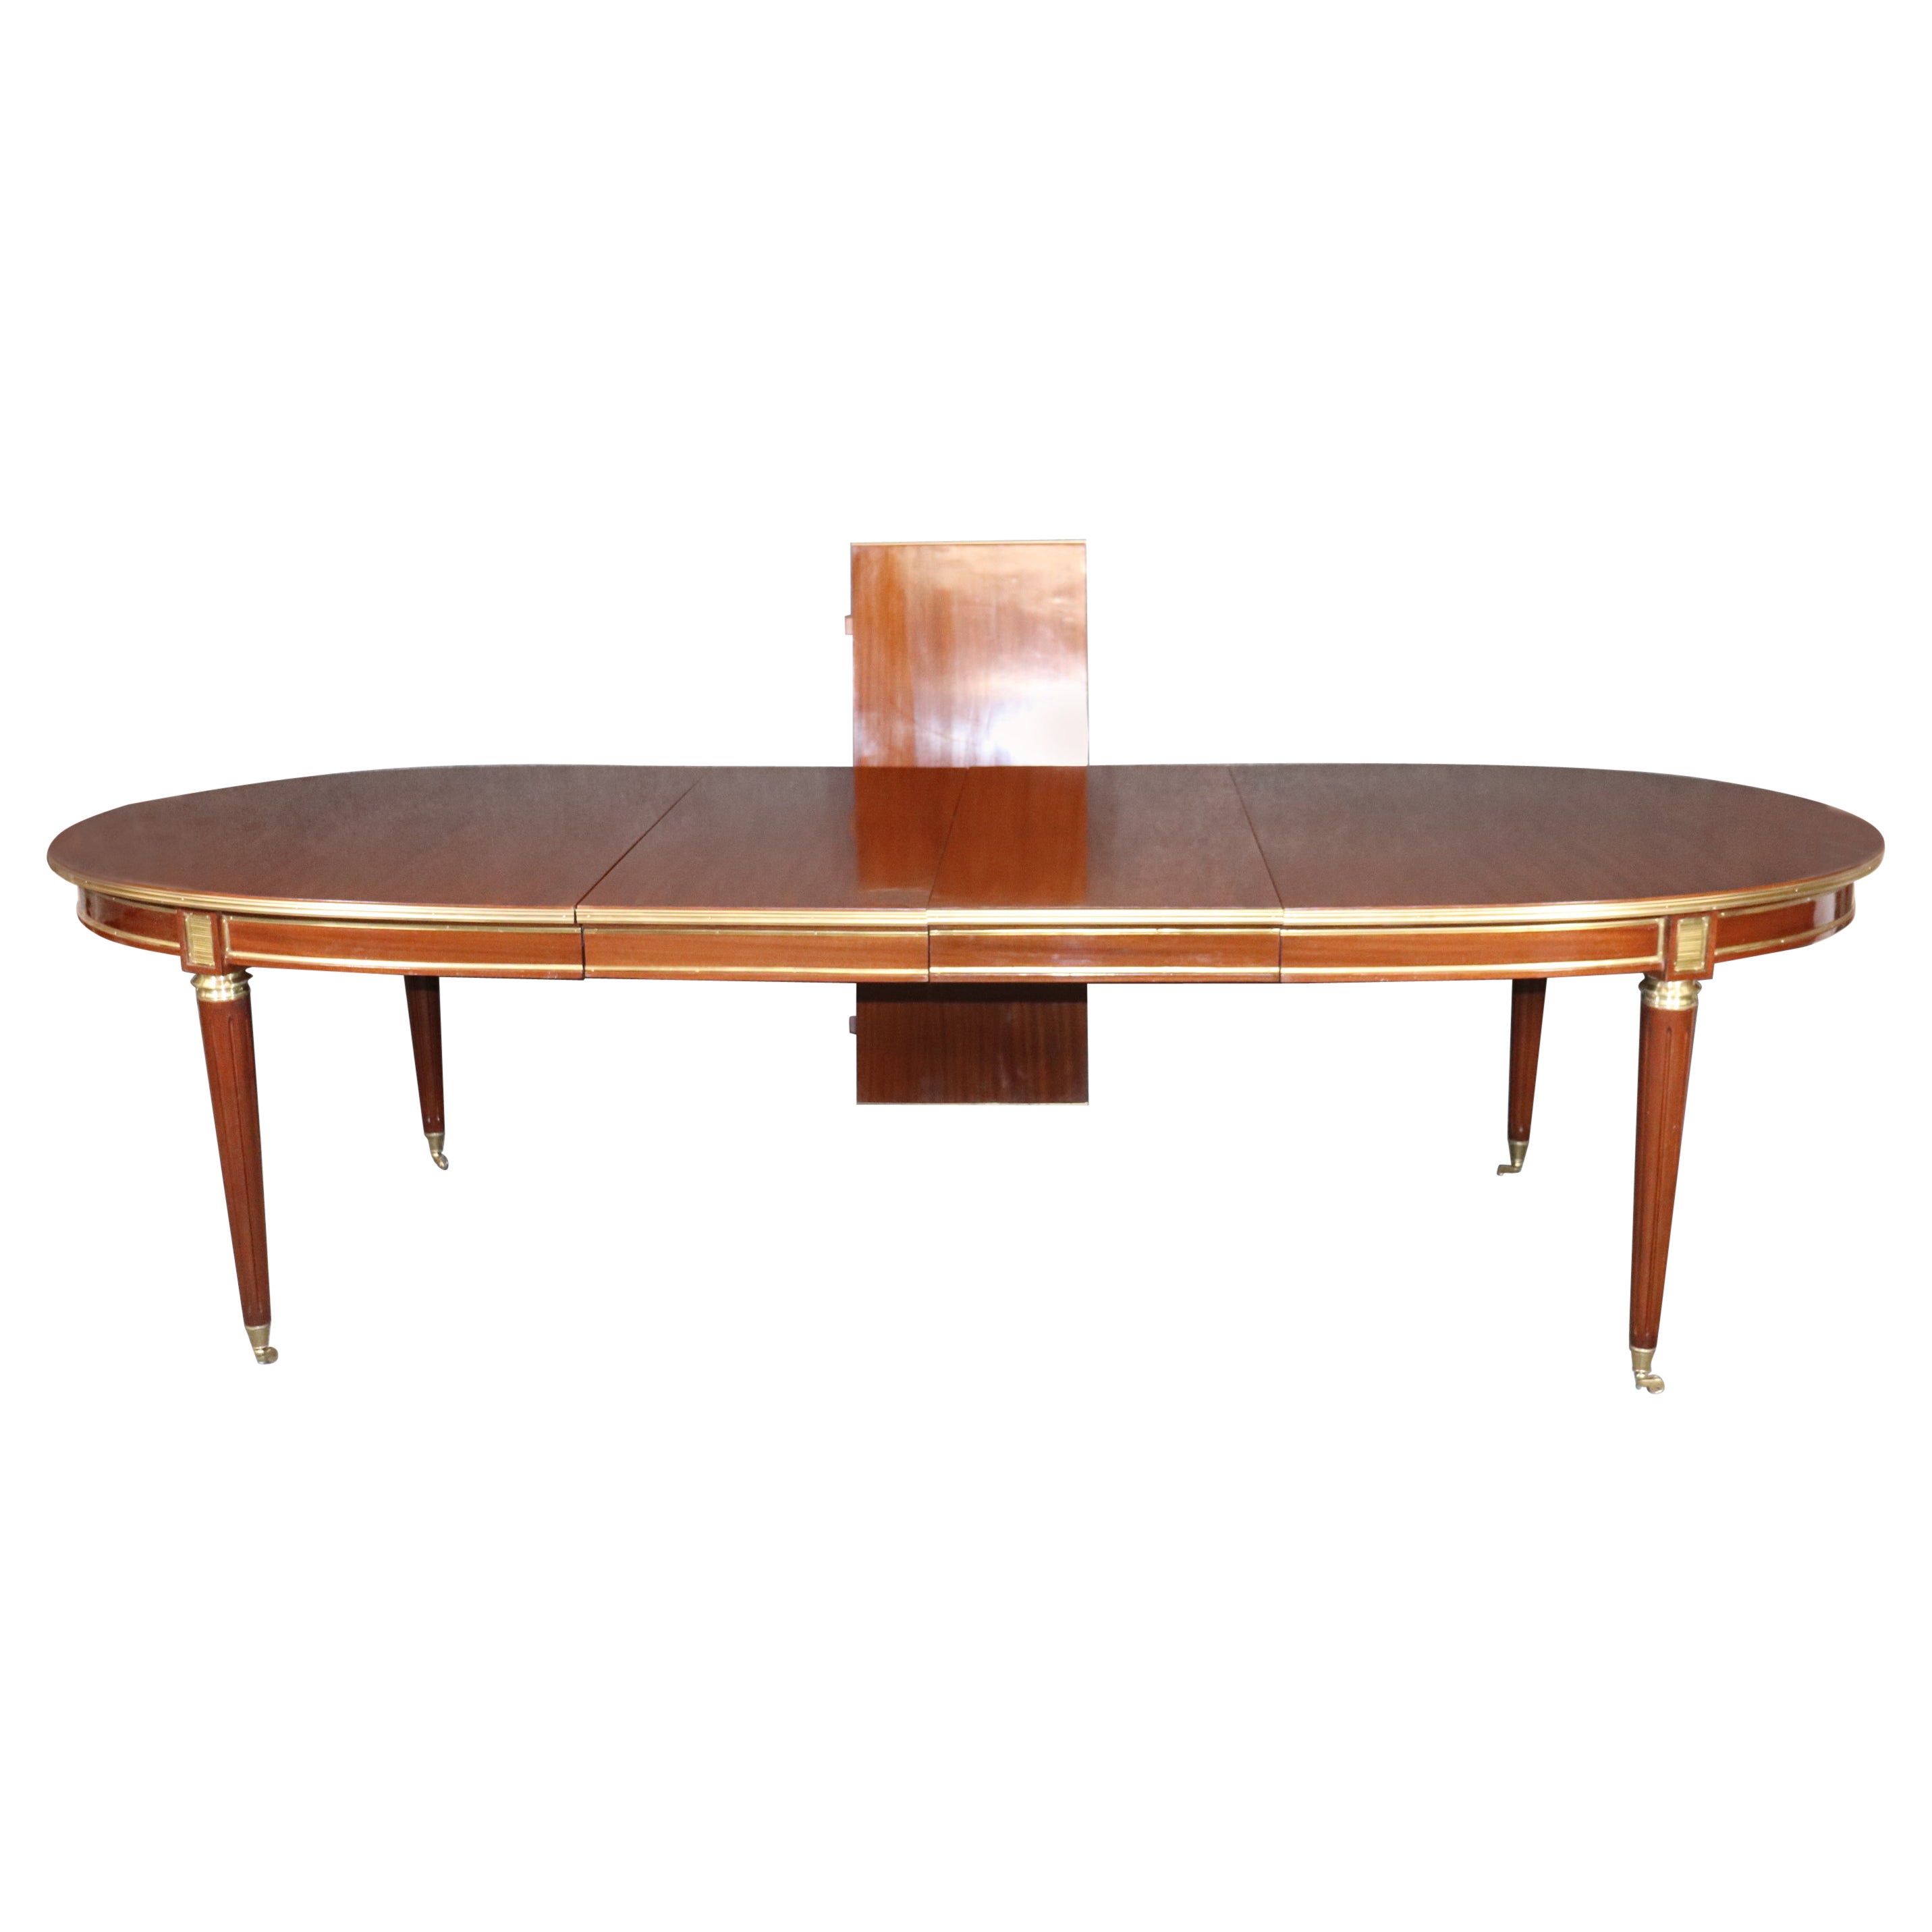 Superb Brass Trimmed Maison Jansen Style Mahogany Dining Table with 3 Leaves